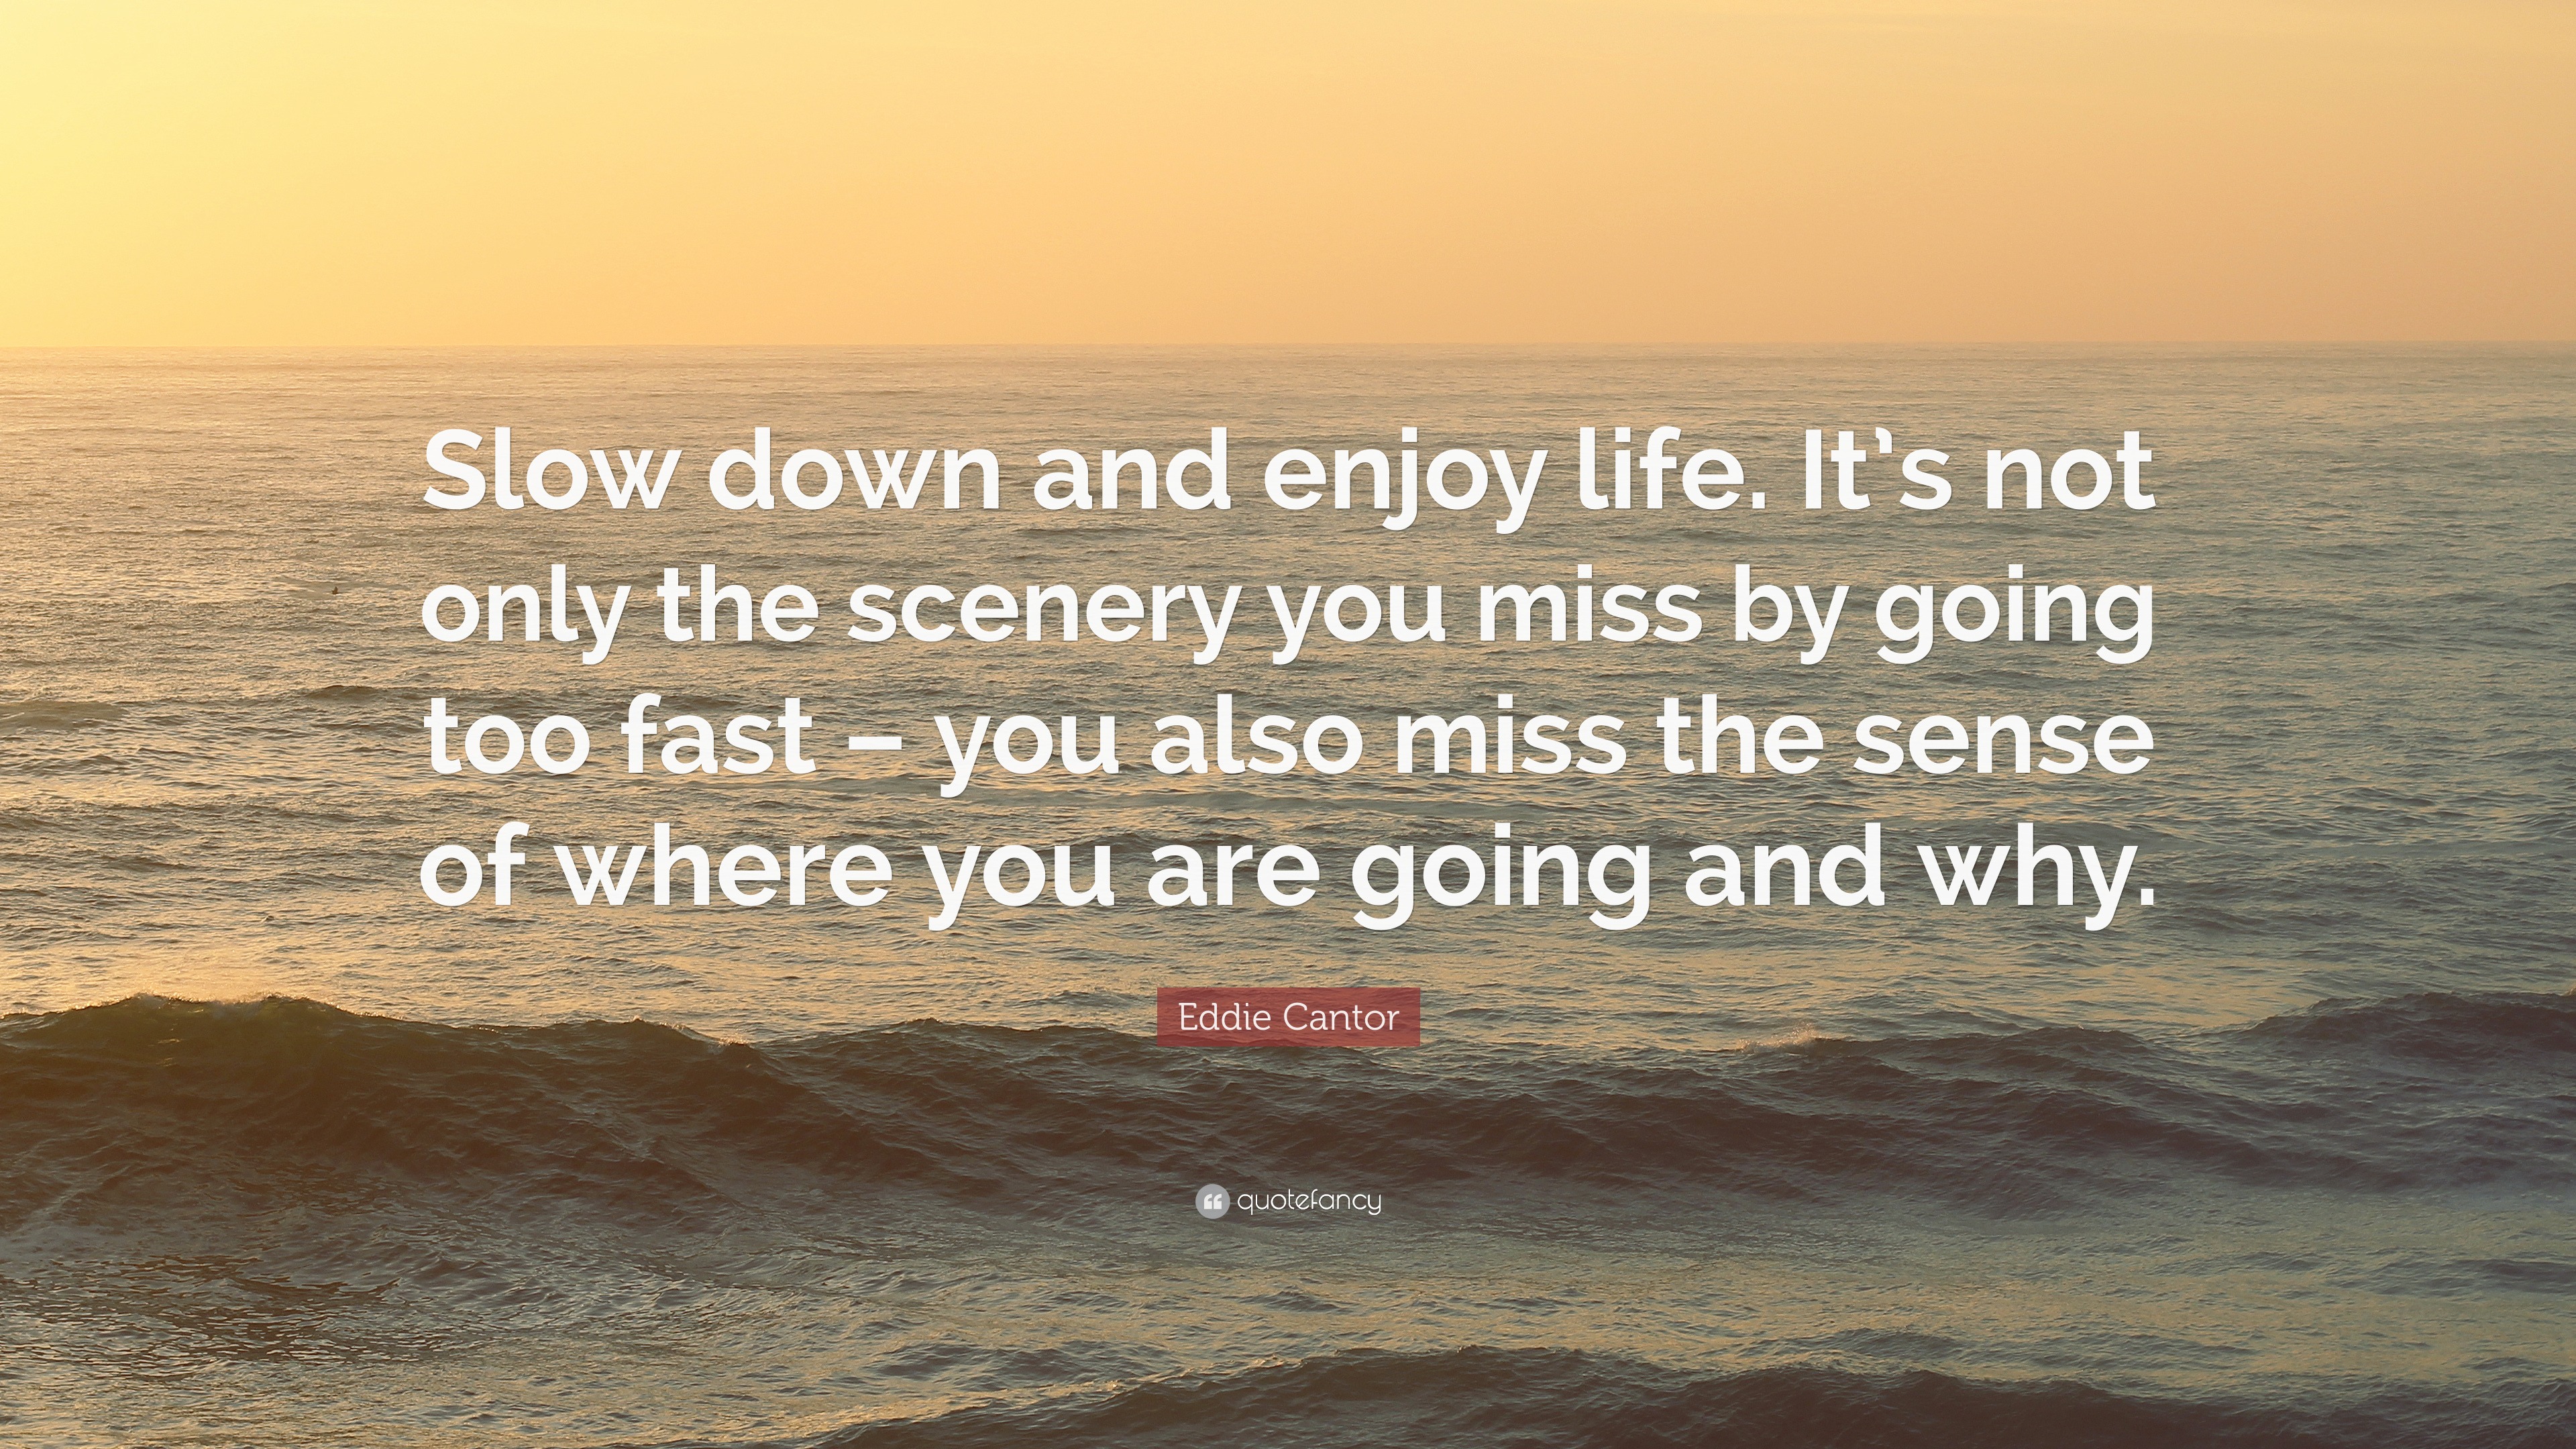 Ed Cantor Quote “Slow down and enjoy life It s not only the scenery